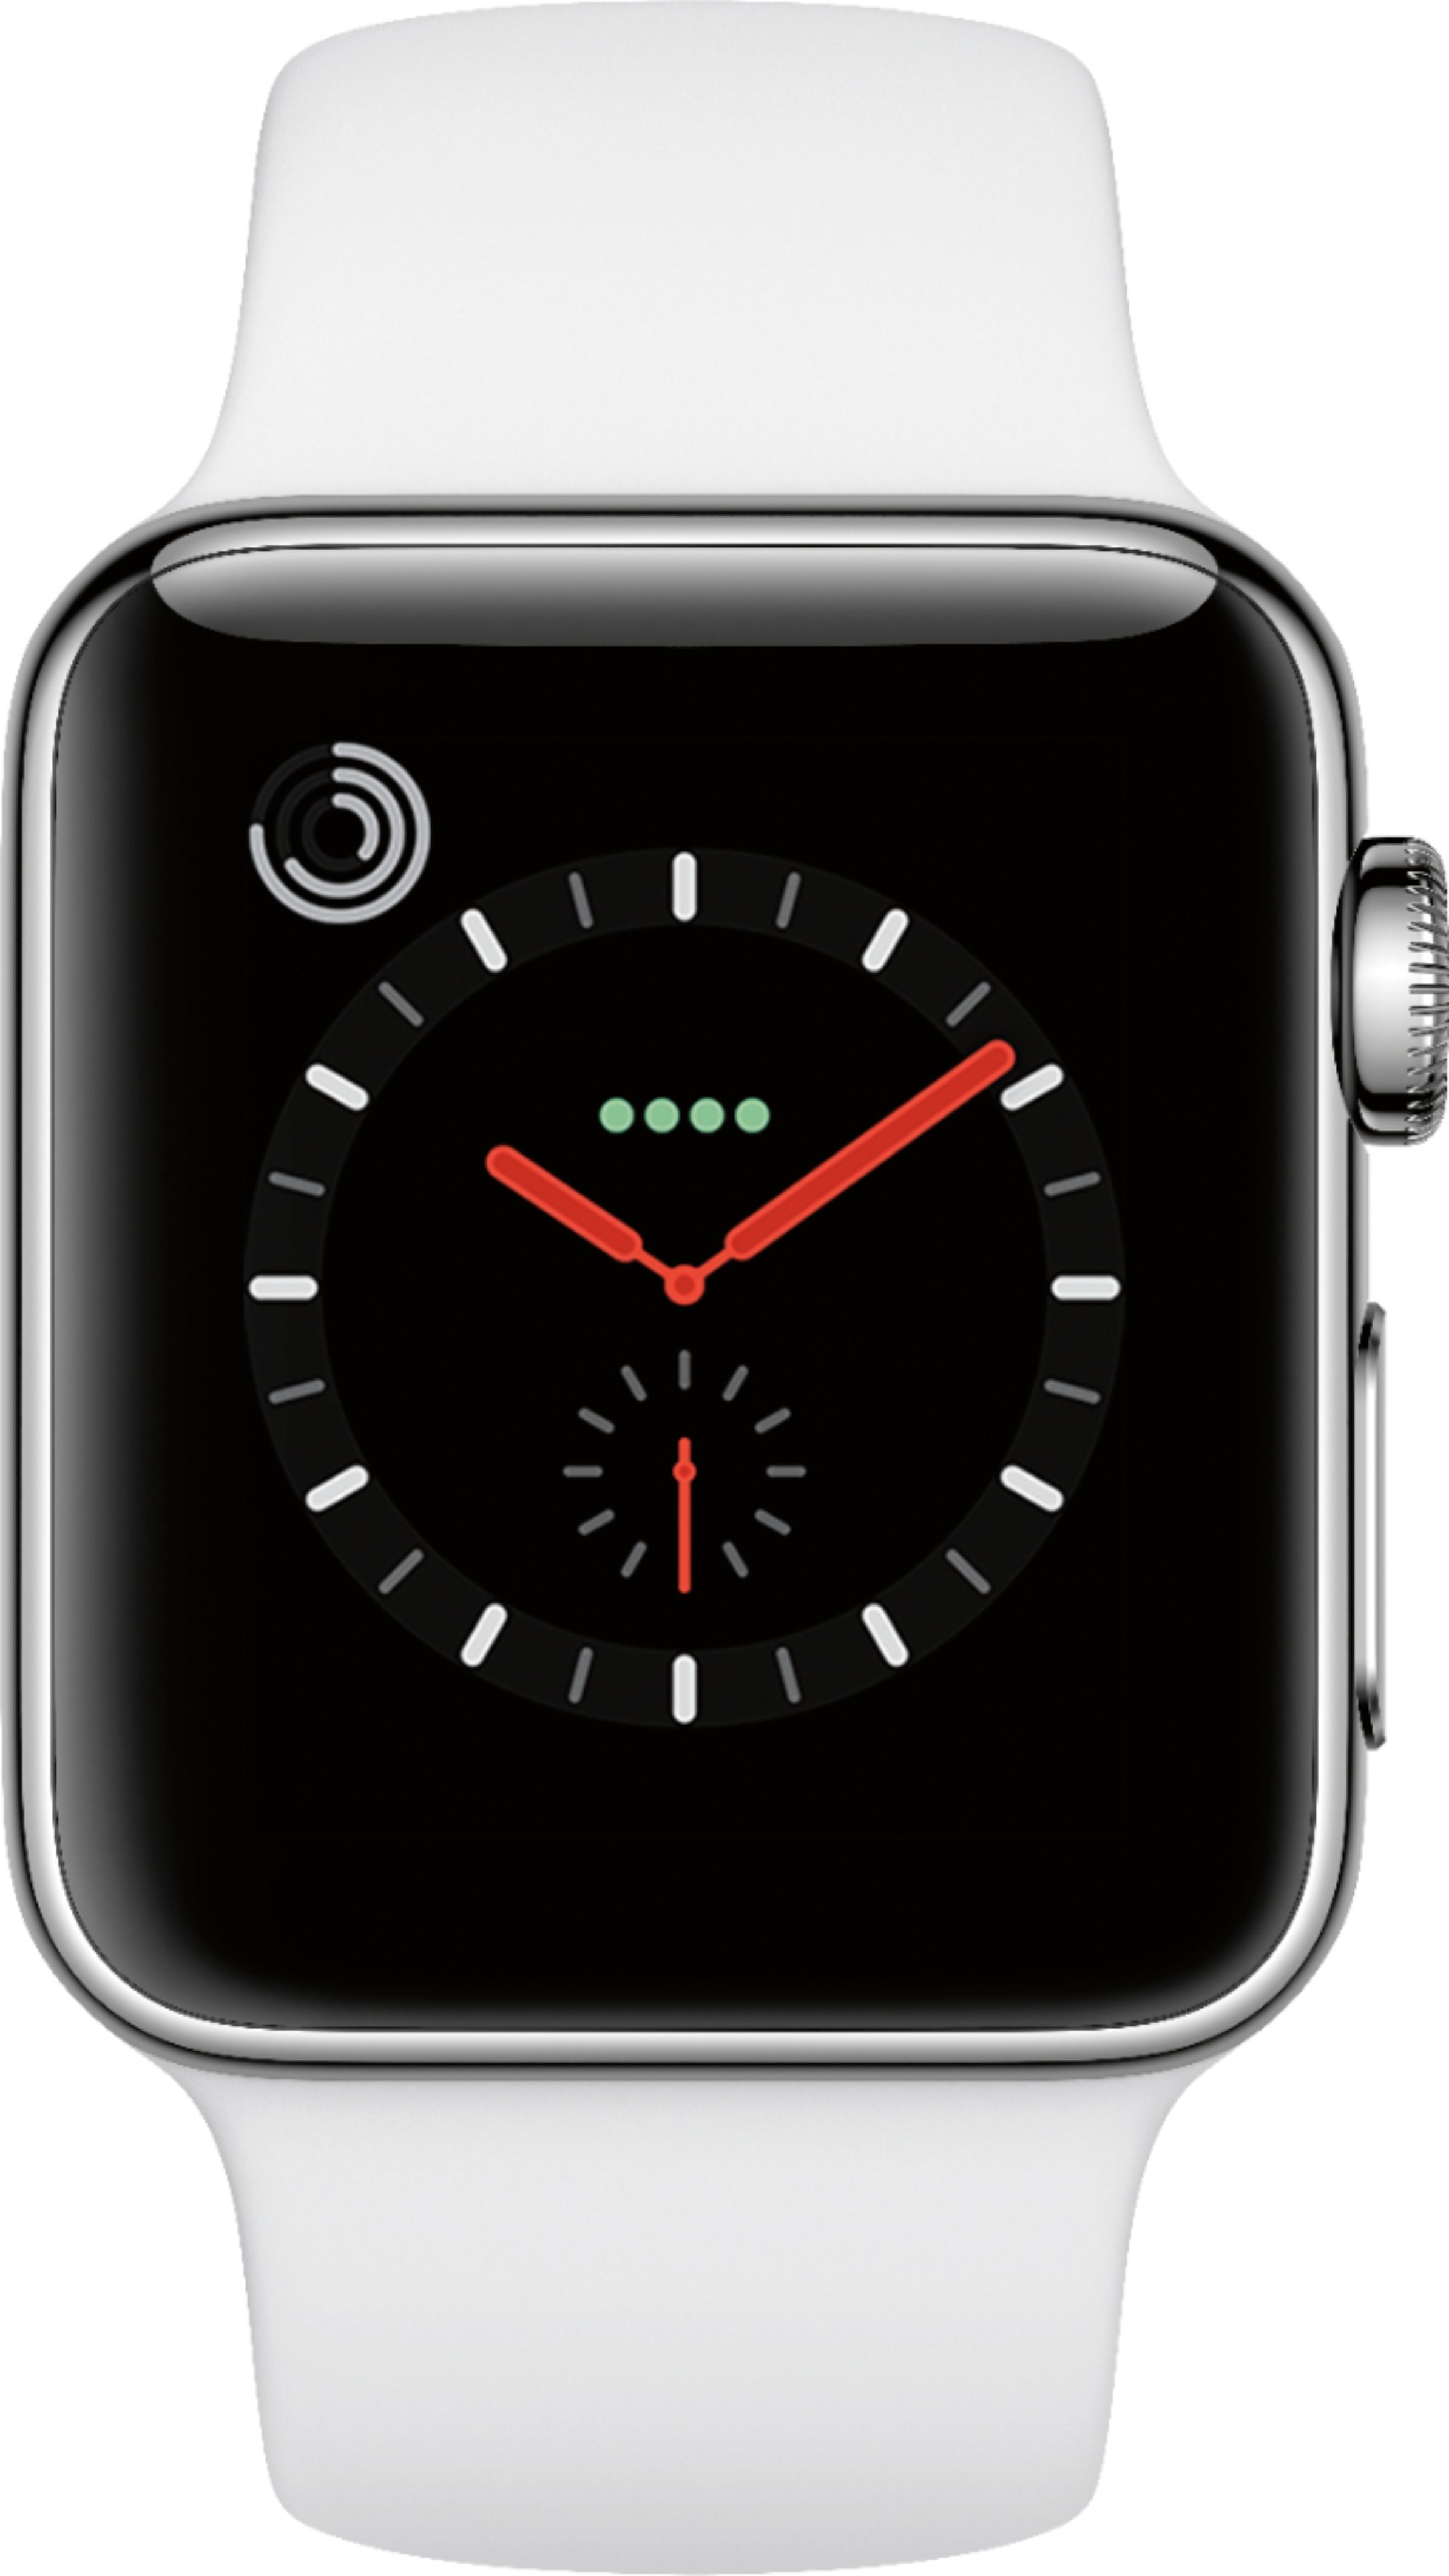 Best Buy: Apple Watch Series 3 (GPS + Cellular) 38mm Stainless